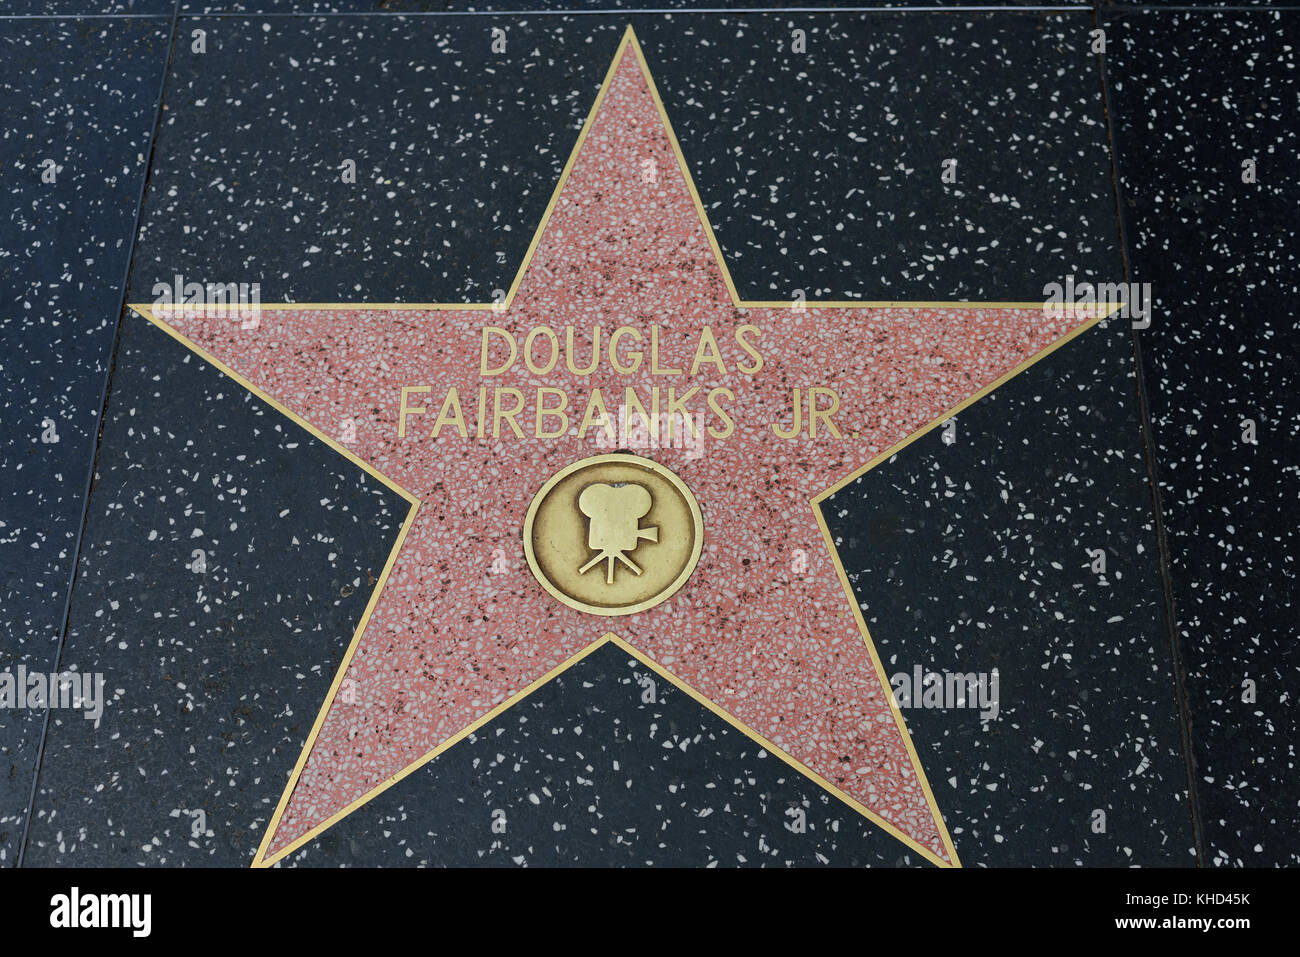 HOLLYWOOD, CA - DECEMBER 06: Douglas Fairbanks star on the Hollywood Walk of Fame in Hollywood, California on Dec. 6, 2016. Stock Photo